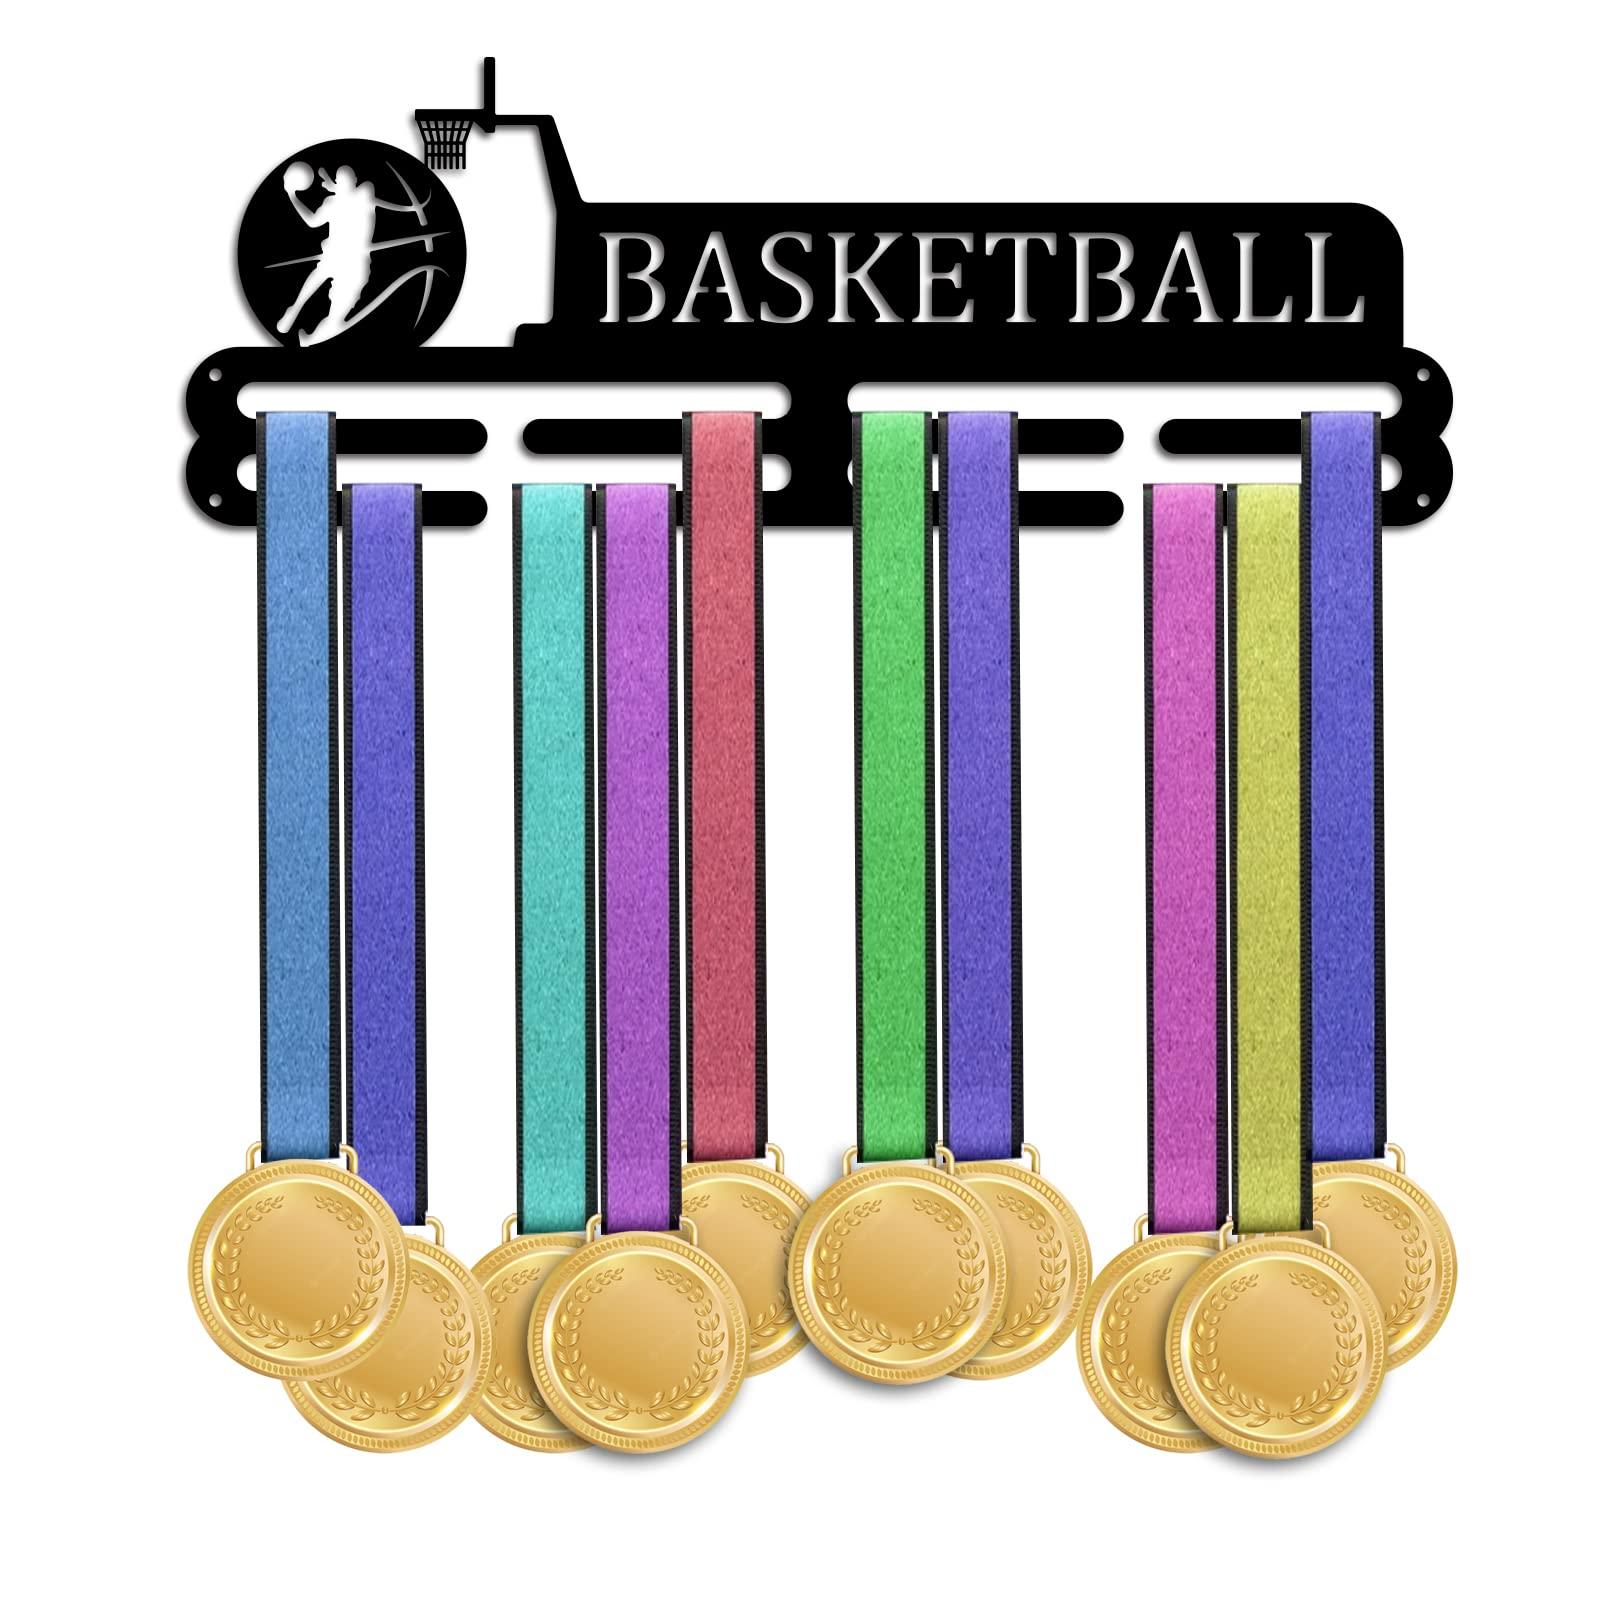 PH PandaHall Sport Basketball Medals Display Stand, Sports Competition Medal Holder Hook 3 Lines Sport Award Rack Wall Mount Iron Frame for over 50 Medals Necklace Jewellery 40x15cm/15.7x5.9inch